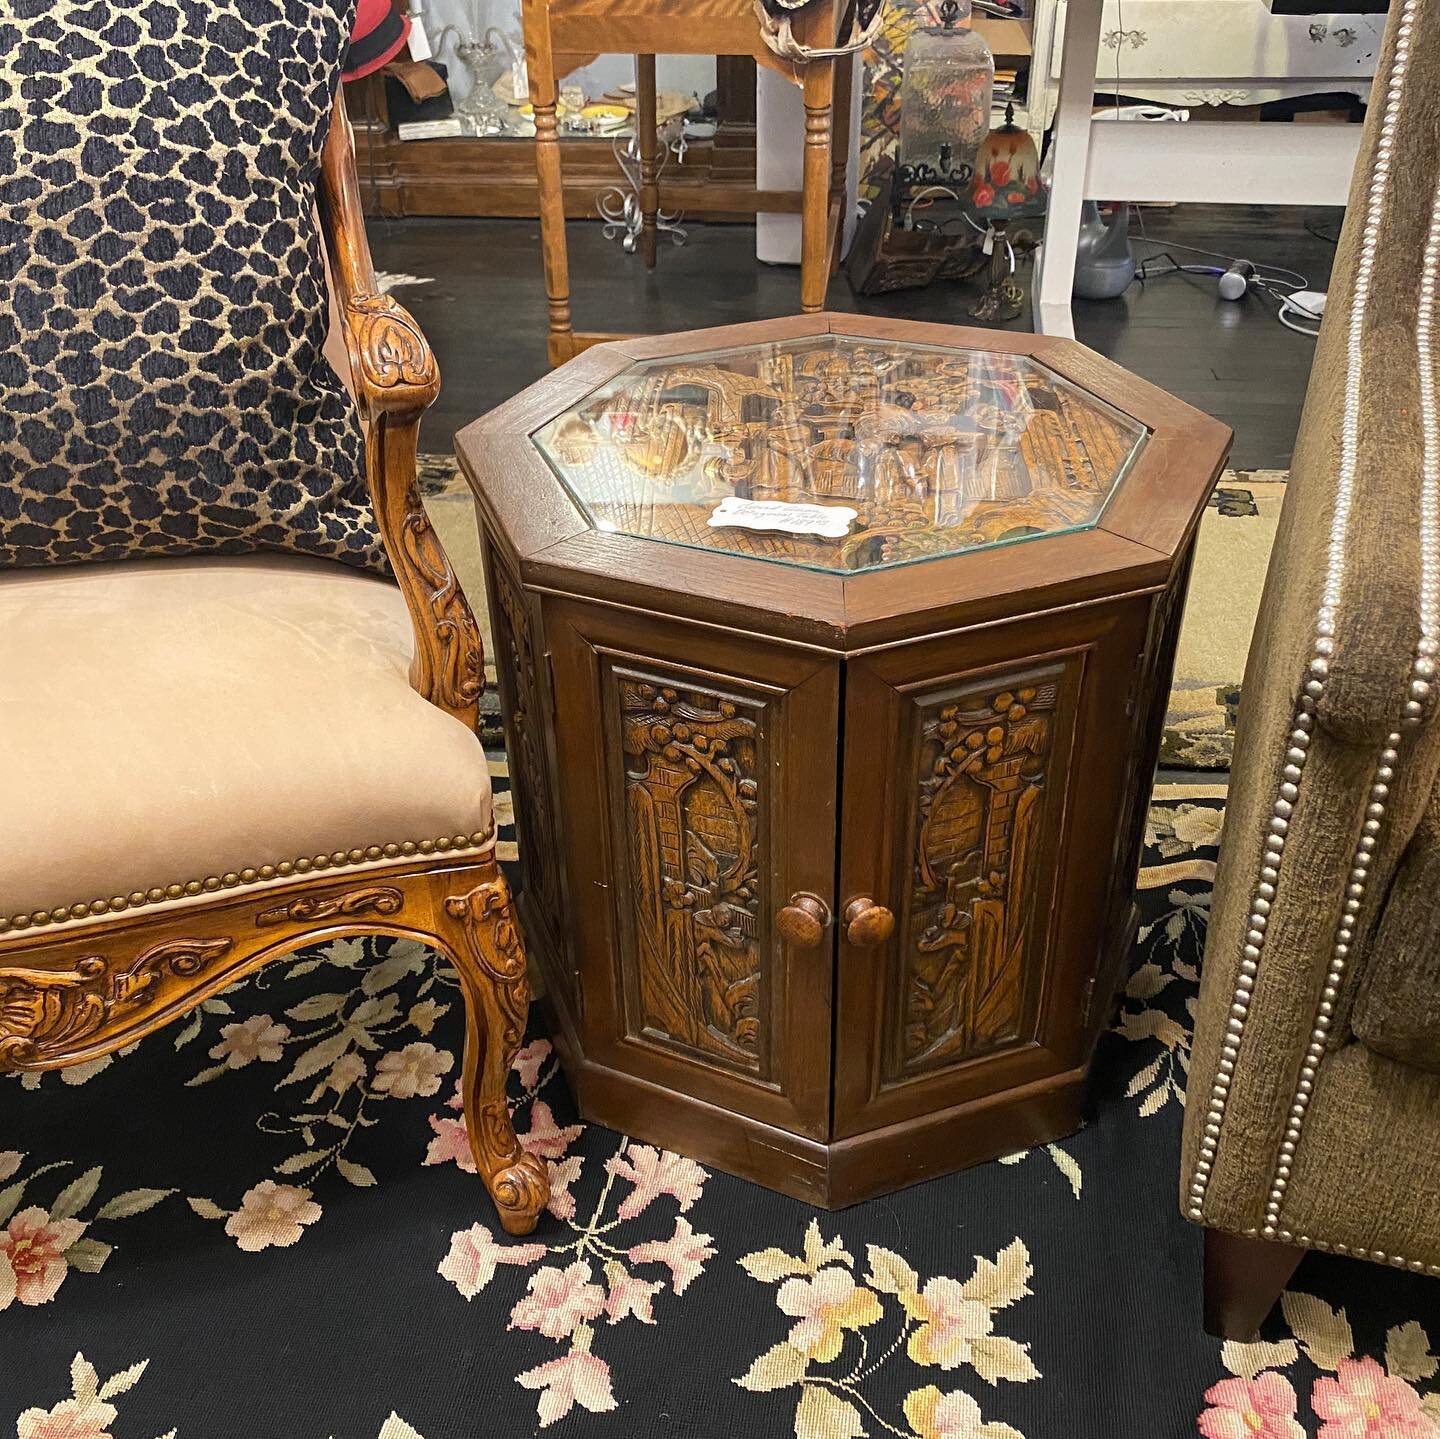 Beautifully Carved Asian Side Table. The top carvings are protected by glass. There is also plenty of storage space inside.